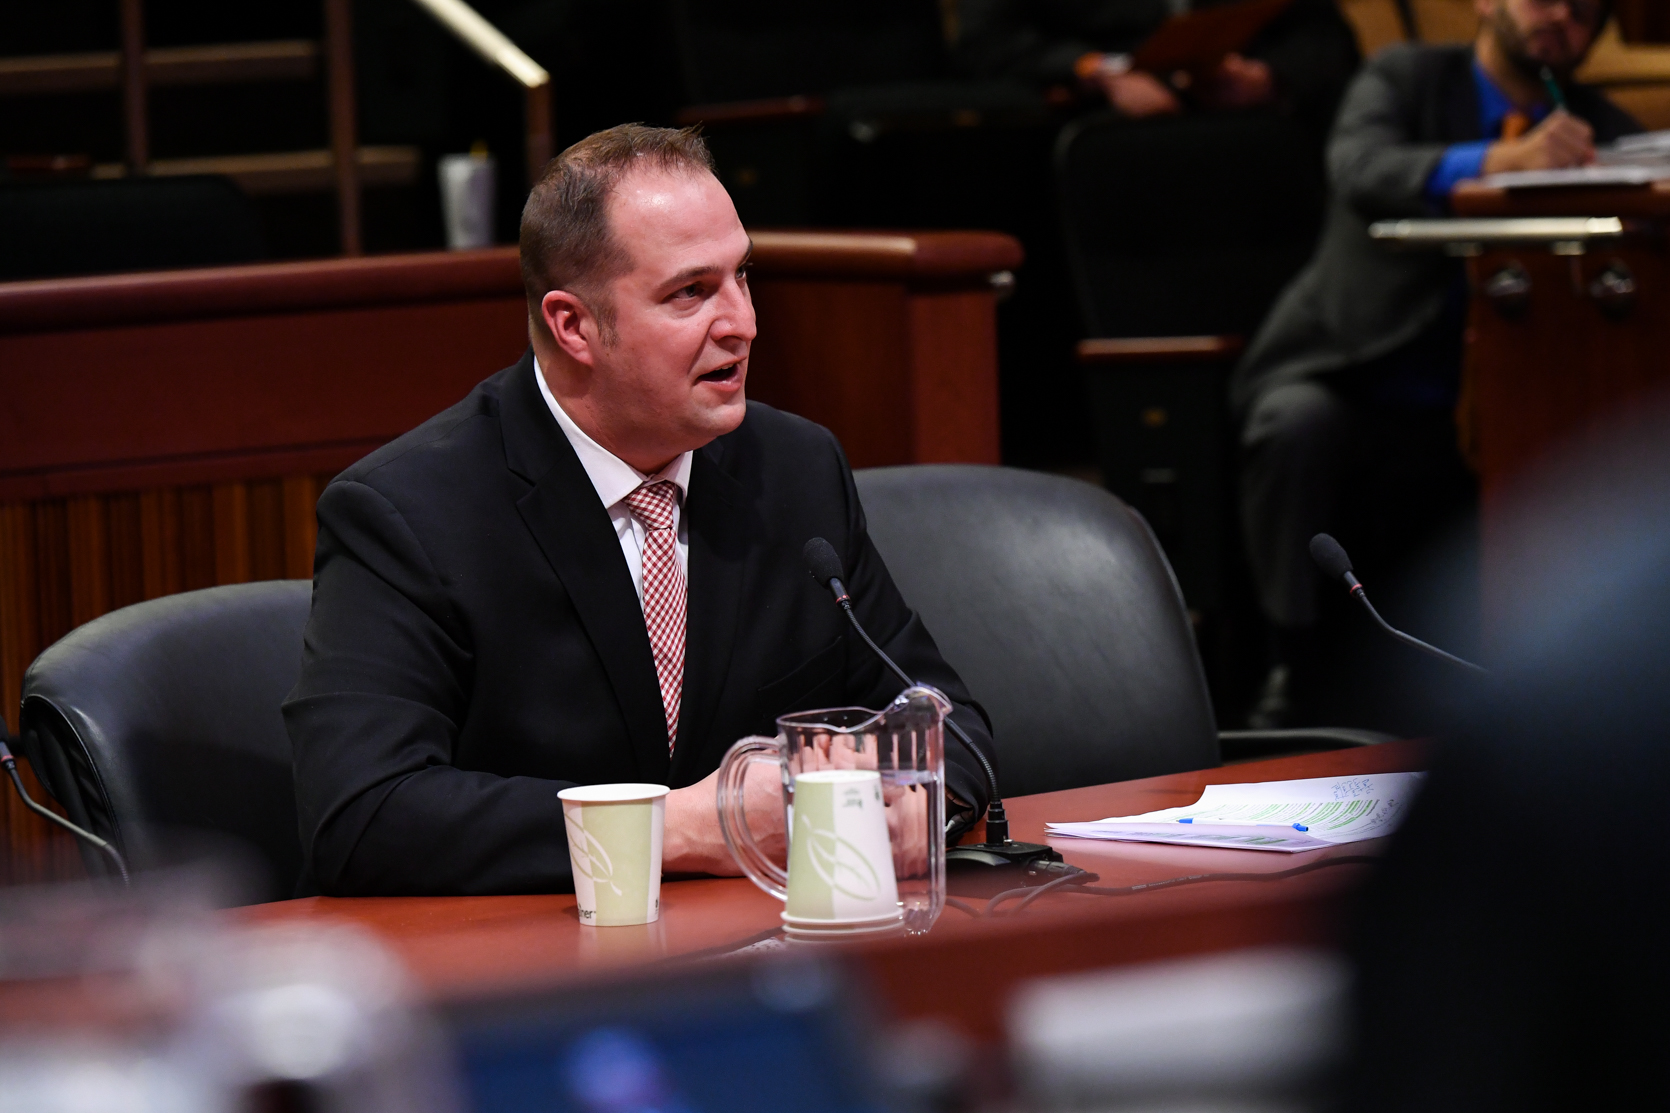 Montgomery County Executive Matthew L. Ossenfort giving testimony to the New York State Assembly Standing Committees on Local Governments and Cities